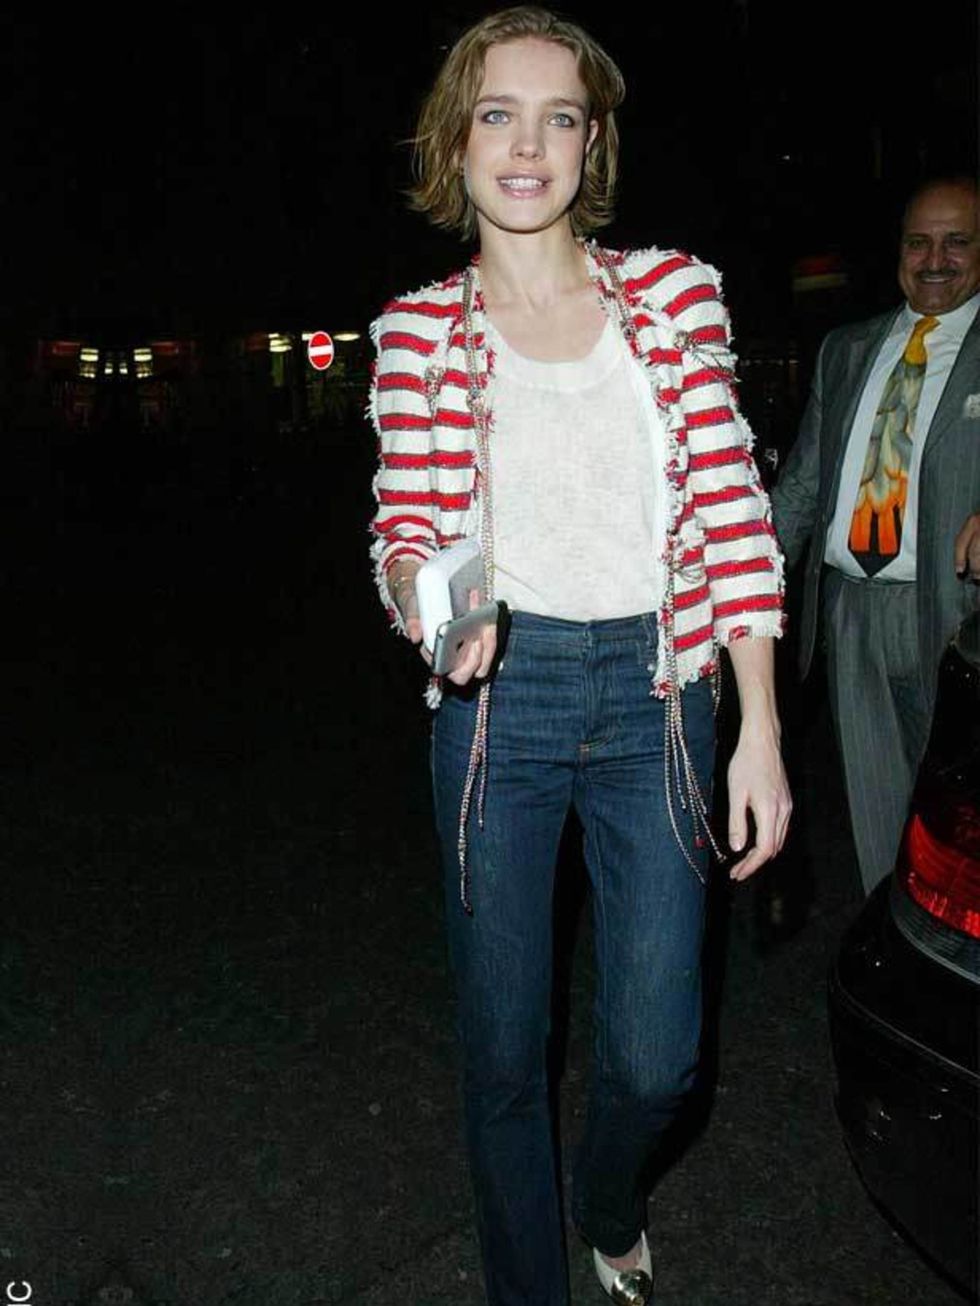 <p>Natalia Vodianova attends the <a href="http://www.elleuk.com/catwalk/collections/chanel/">Chanel </a>Party at Berkley Square December 05, 2007 in London.</p>